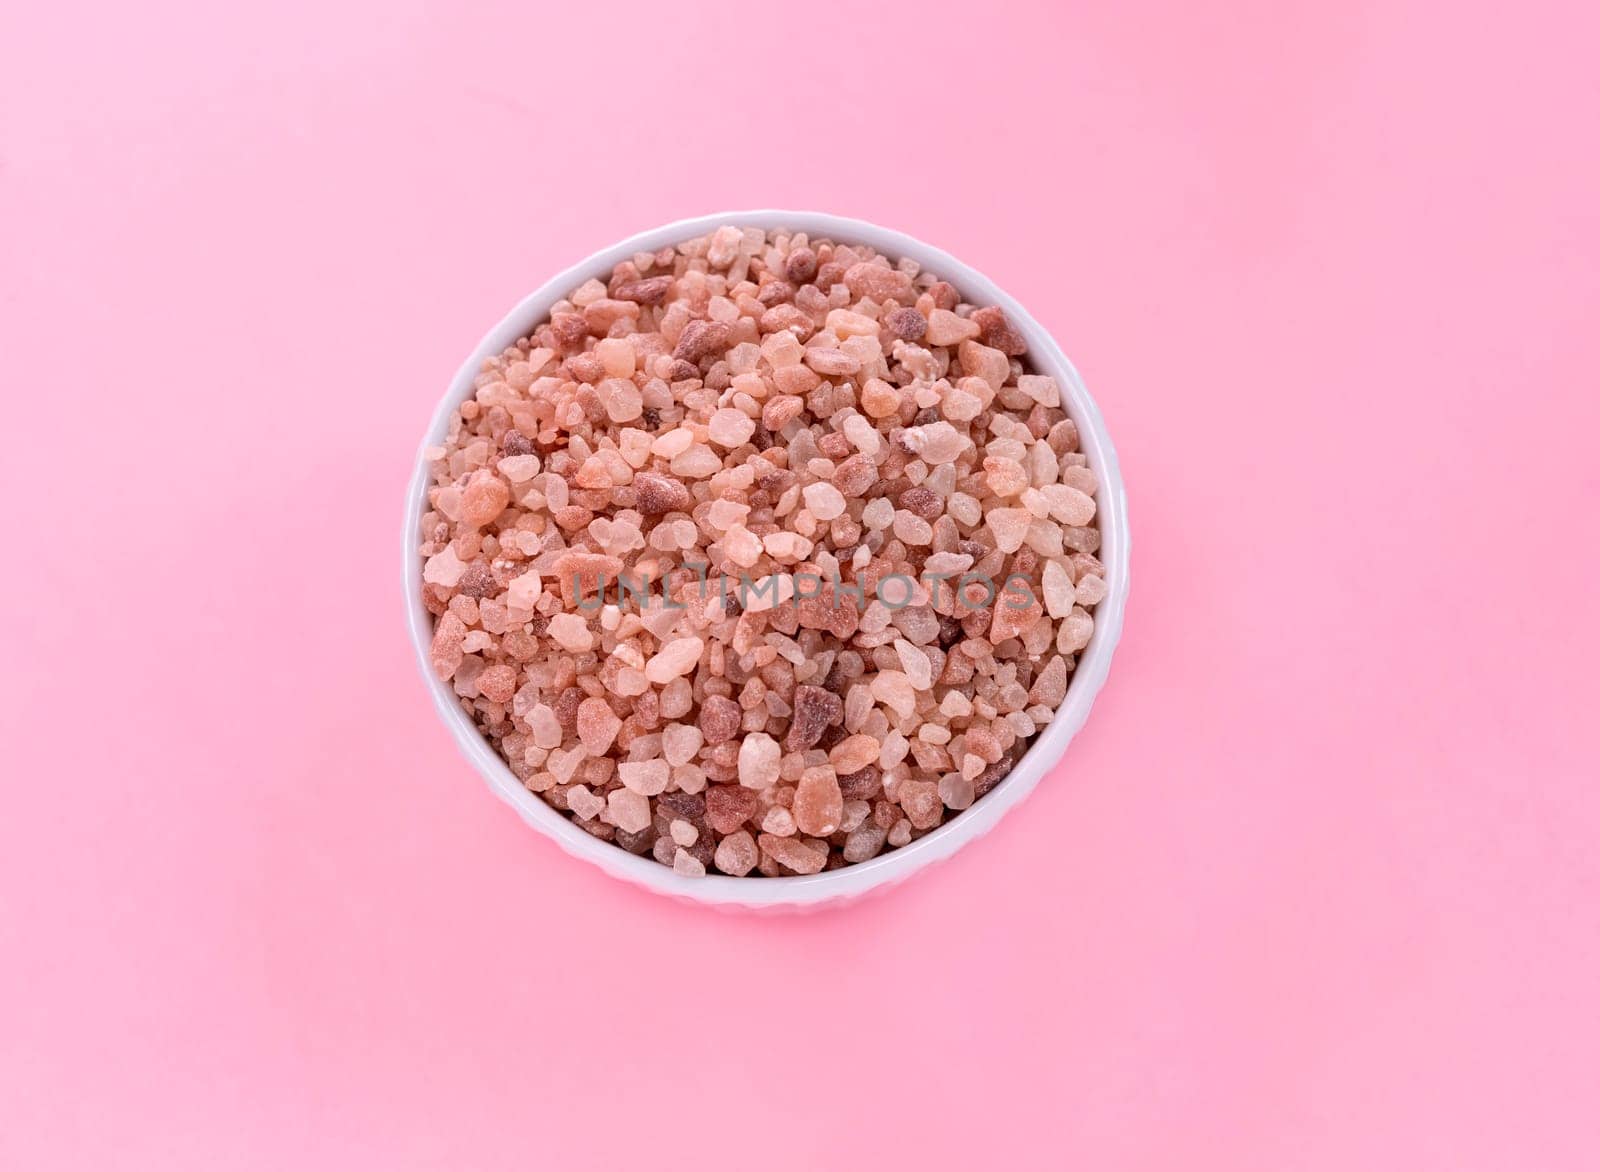 Flatly Pink Himalayan Rock Salt, Halite In White Ceramic Bowl On Pink Background. Top View Horizontal Plane, Copy Space For Text. High quality photo.